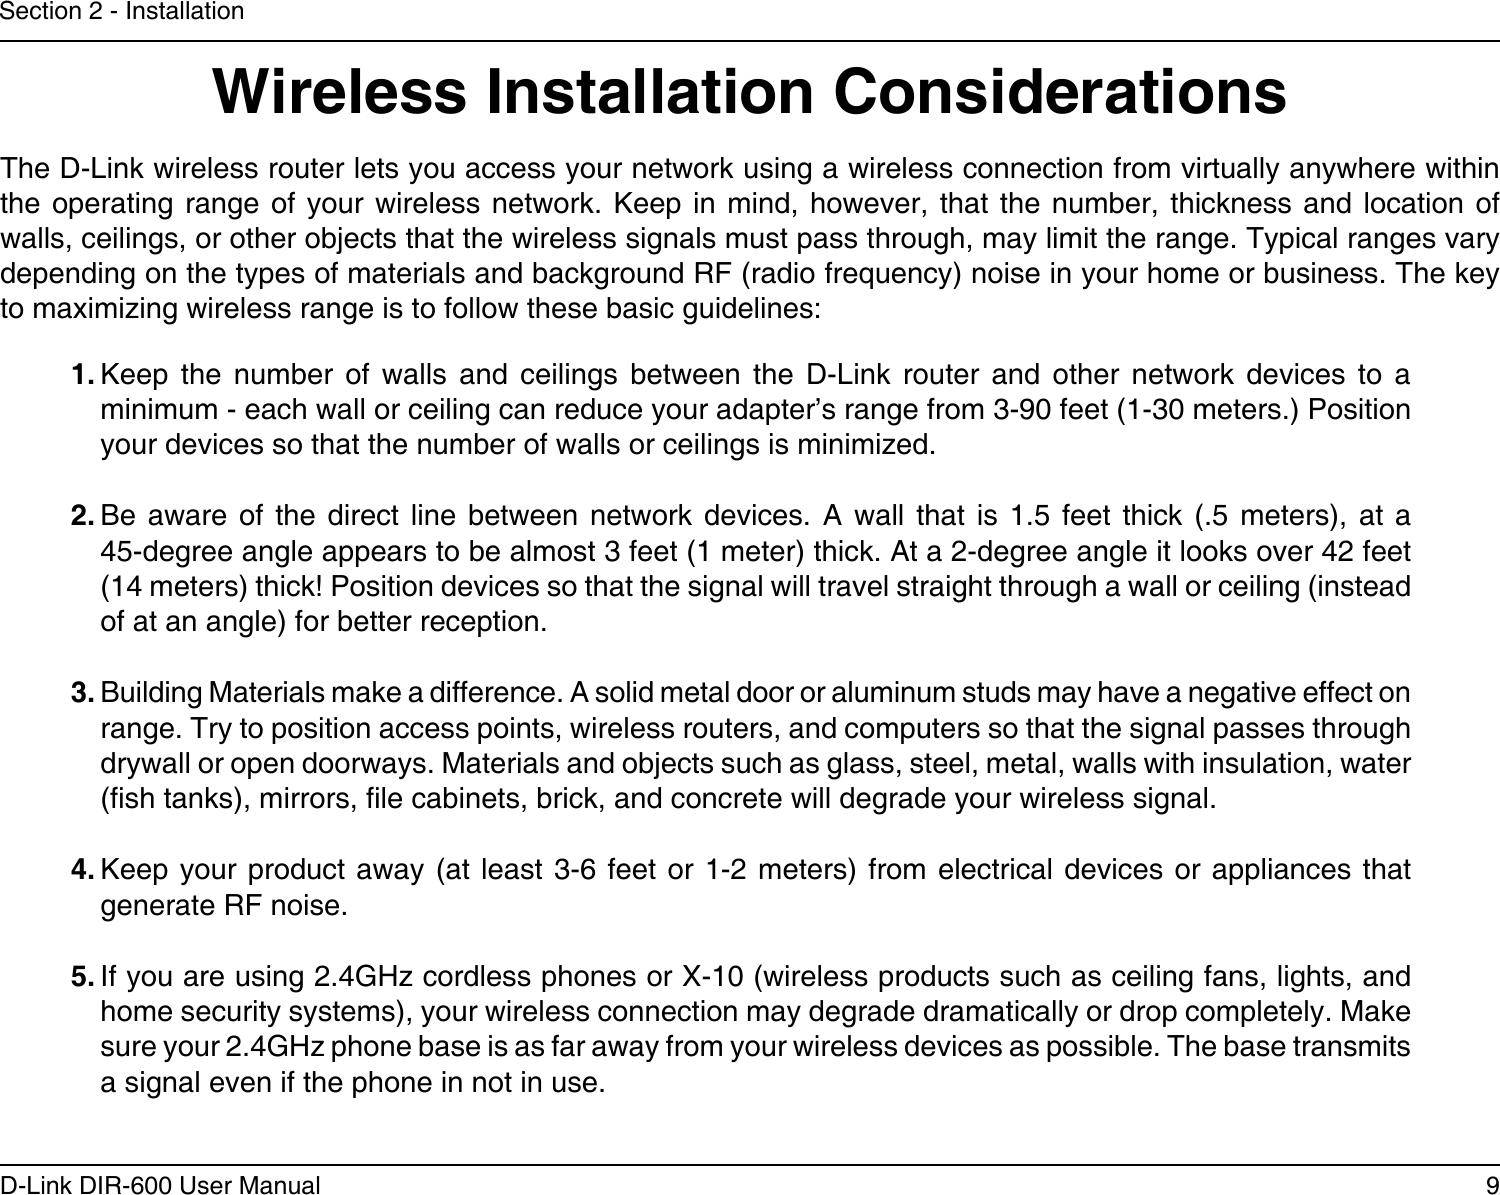 9D-Link DIR-600 User ManualSection 2 - InstallationWireless Installation ConsiderationsThe D-Link wireless router lets you access your network using a wireless connection from virtually anywhere within the operating range of  your  wireless  network. Keep in mind,  however,  that  the number, thickness and  location  of walls, ceilings, or other objects that the wireless signals must pass through, may limit the range. Typical ranges vary depending on the types of materials and background RF (radio frequency) noise in your home or business. The key to maximizing wireless range is to follow these basic guidelines:1. Keep  the  number  of  walls  and  ceilings  between  the  D-Link  router  and  other  network  devices  to  a minimum - each wall or ceiling can reduce your adapter’s range from 3-90 feet (1-30 meters.) Position your devices so that the number of walls or ceilings is minimized.2. Be  aware  of  the  direct  line  between  network  devices.  A  wall  that  is  1.5  feet  thick  (.5  meters),  at  a   45-degree angle appears to be almost 3 feet (1 meter) thick. At a 2-degree angle it looks over 42 feet (14 meters) thick! Position devices so that the signal will travel straight through a wall or ceiling (instead of at an angle) for better reception.3. Building Materials make a difference. A solid metal door or aluminum studs may have a negative effect on range. Try to position access points, wireless routers, and computers so that the signal passes through drywall or open doorways. Materials and objects such as glass, steel, metal, walls with insulation, water (sh tanks), mirrors, le cabinets, brick, and concrete will degrade your wireless signal.4. Keep your product  away (at least  3-6 feet or  1-2 meters) from  electrical devices or  appliances that generate RF noise.5. If you are using 2.4GHz cordless phones or X-10 (wireless products such as ceiling fans, lights, and home security systems), your wireless connection may degrade dramatically or drop completely. Make sure your 2.4GHz phone base is as far away from your wireless devices as possible. The base transmits a signal even if the phone in not in use.